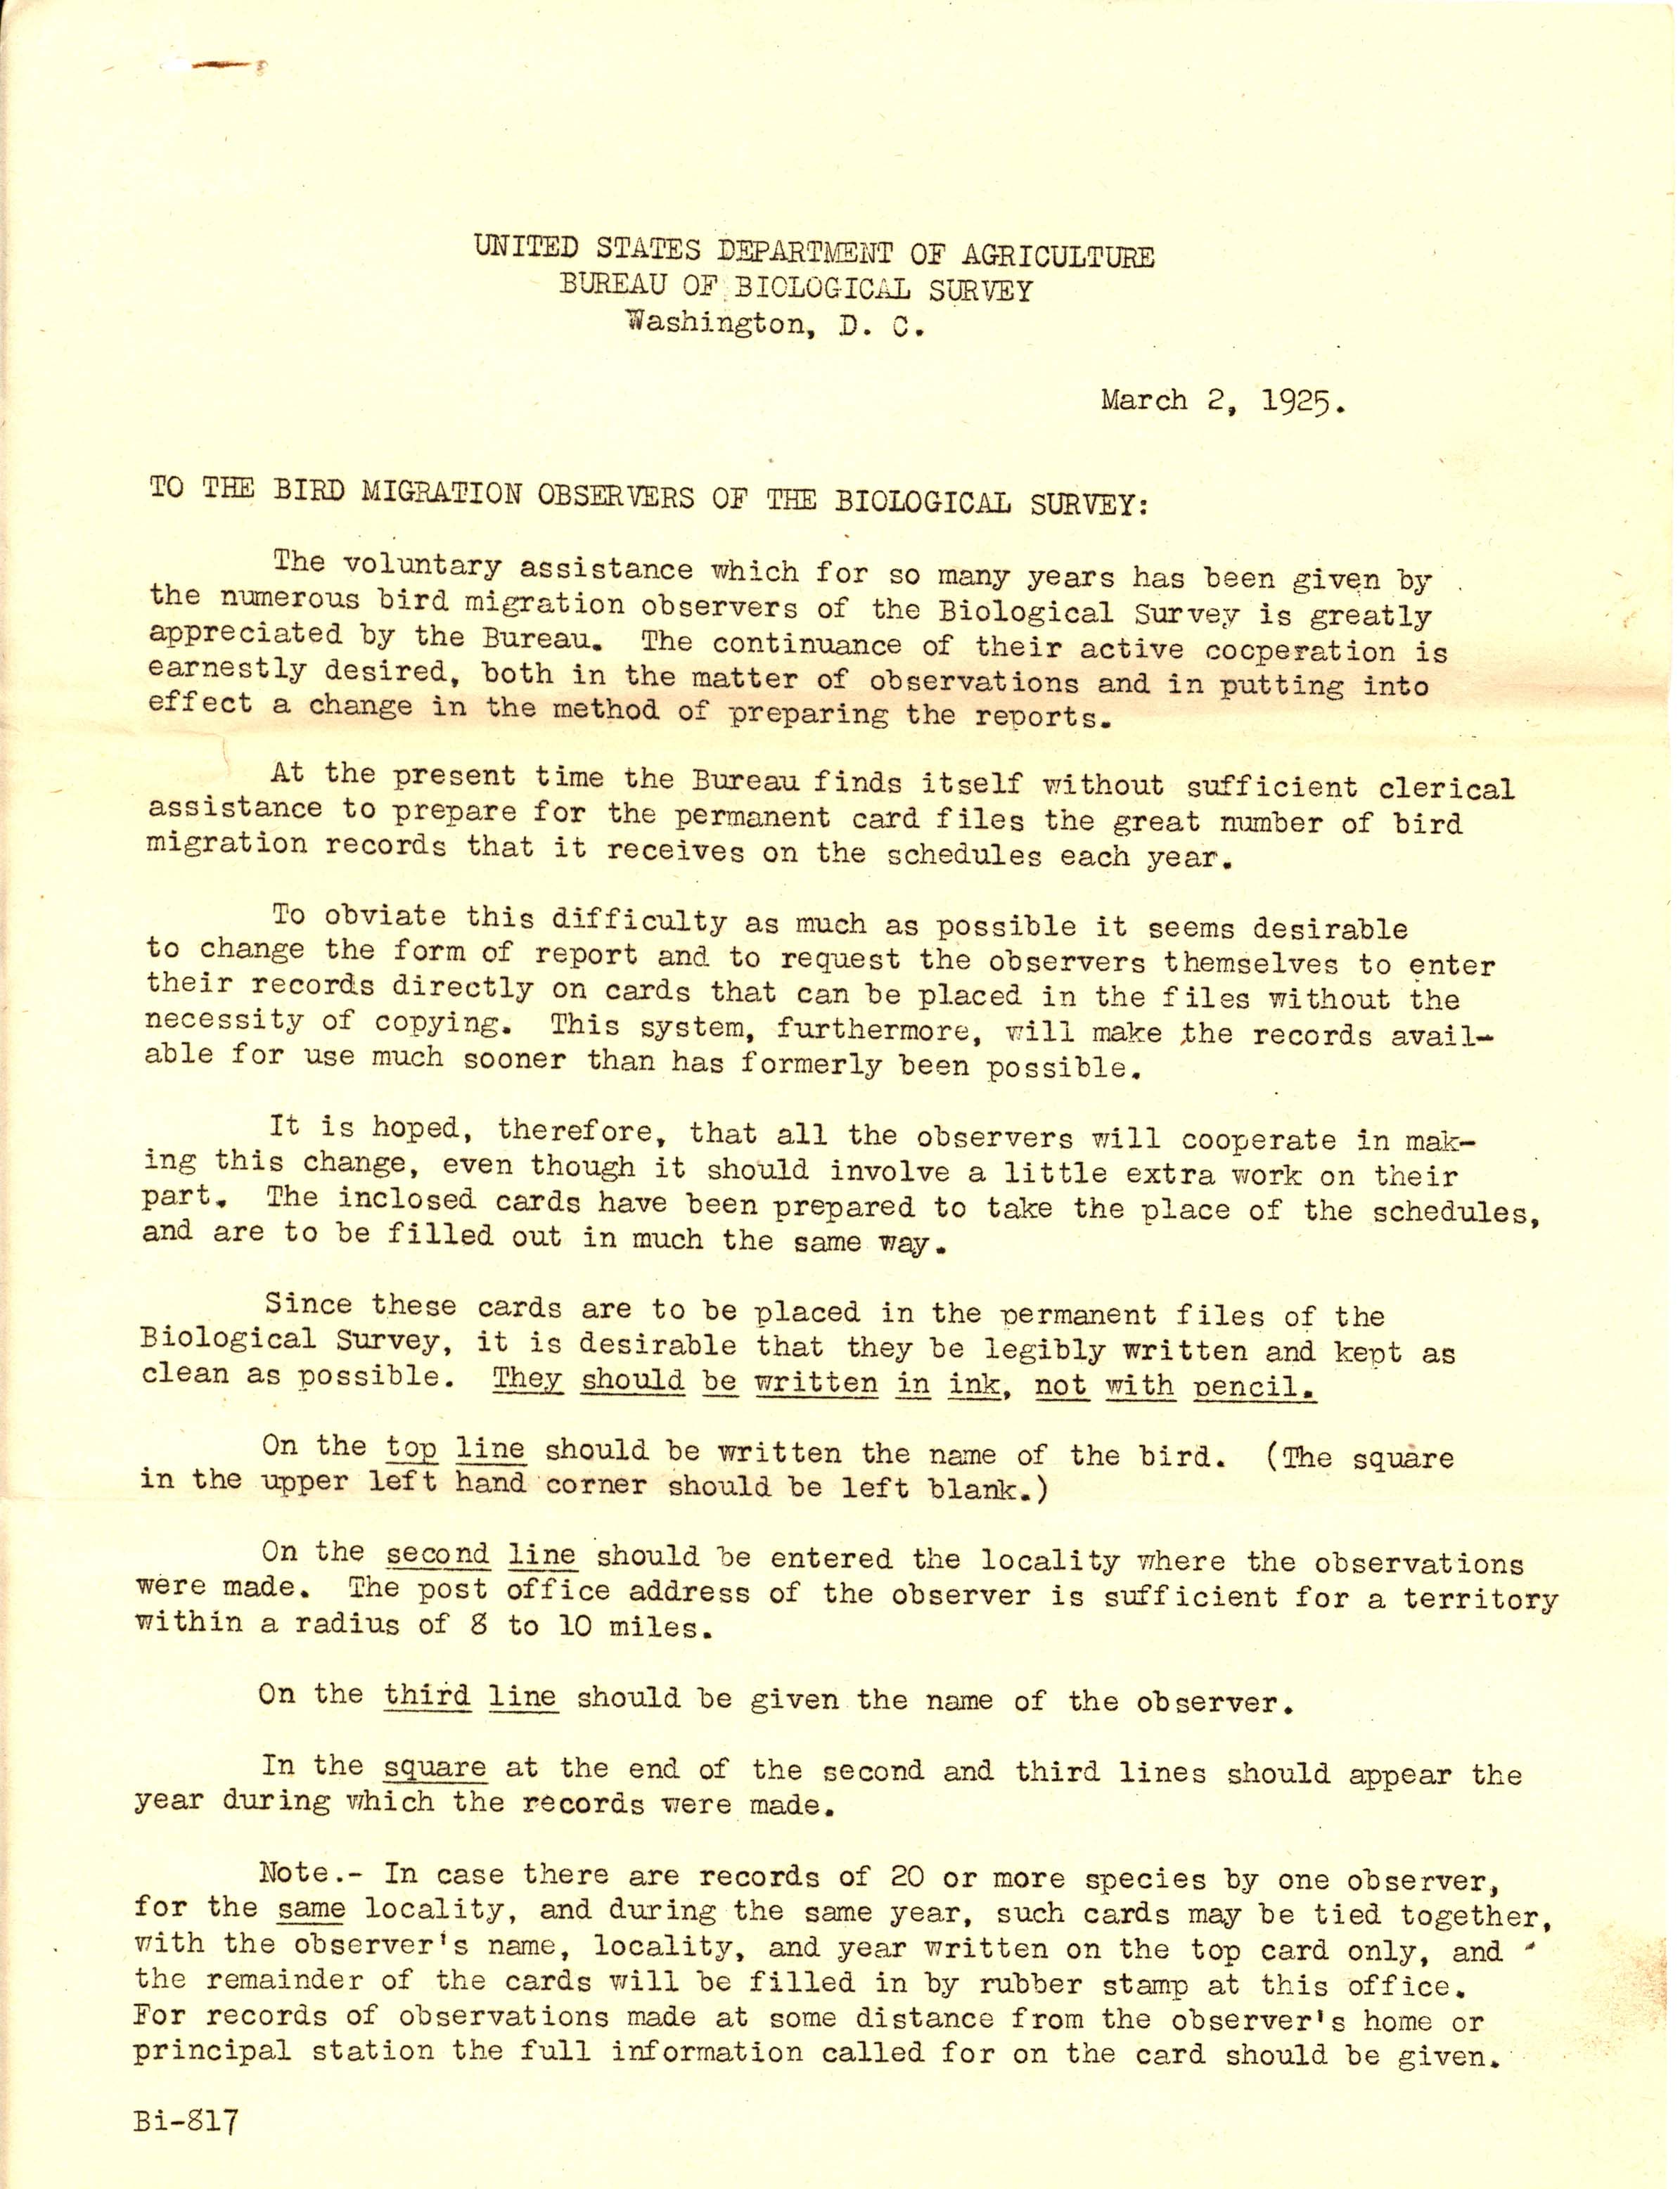 Edward William Nelson letter to the bird migration observers of the Biological Survey regarding a change in reporting bird observations, March 2, 1925